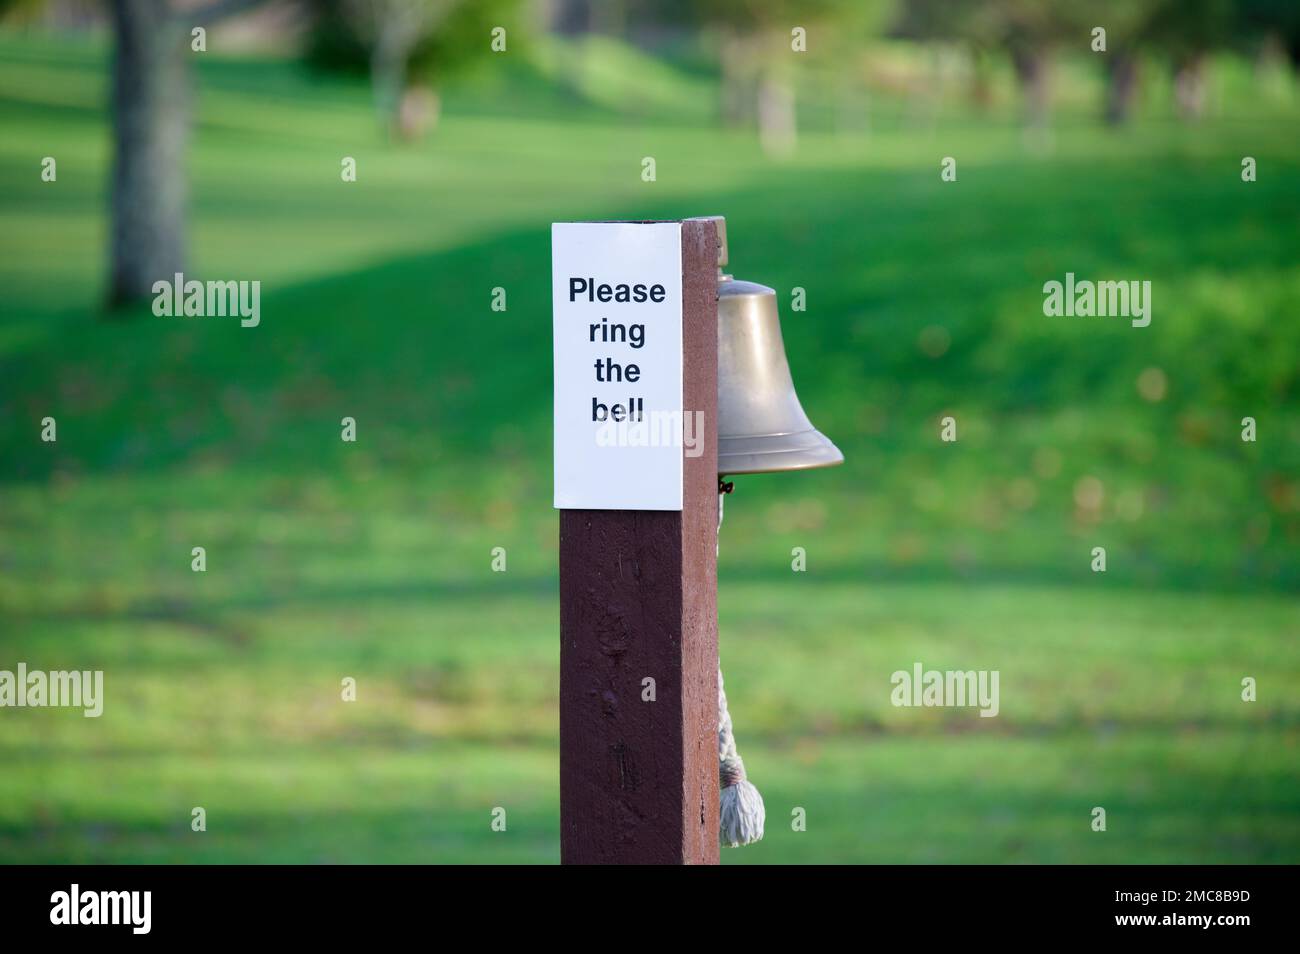 Ring the bell please sign on golf course Stock Photo